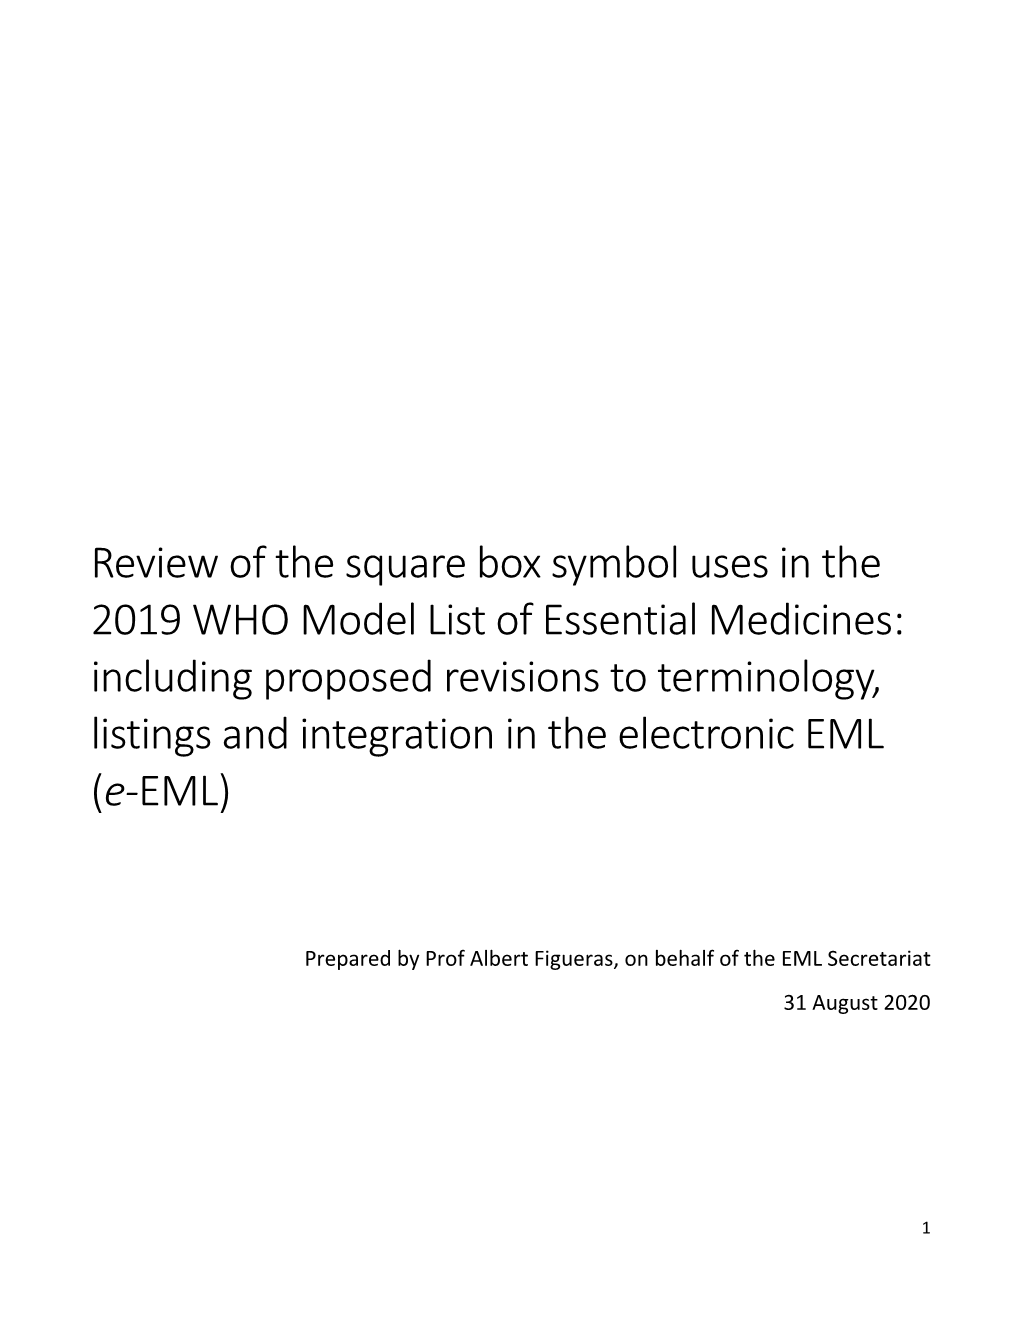 Review of the Square Box Symbol Uses